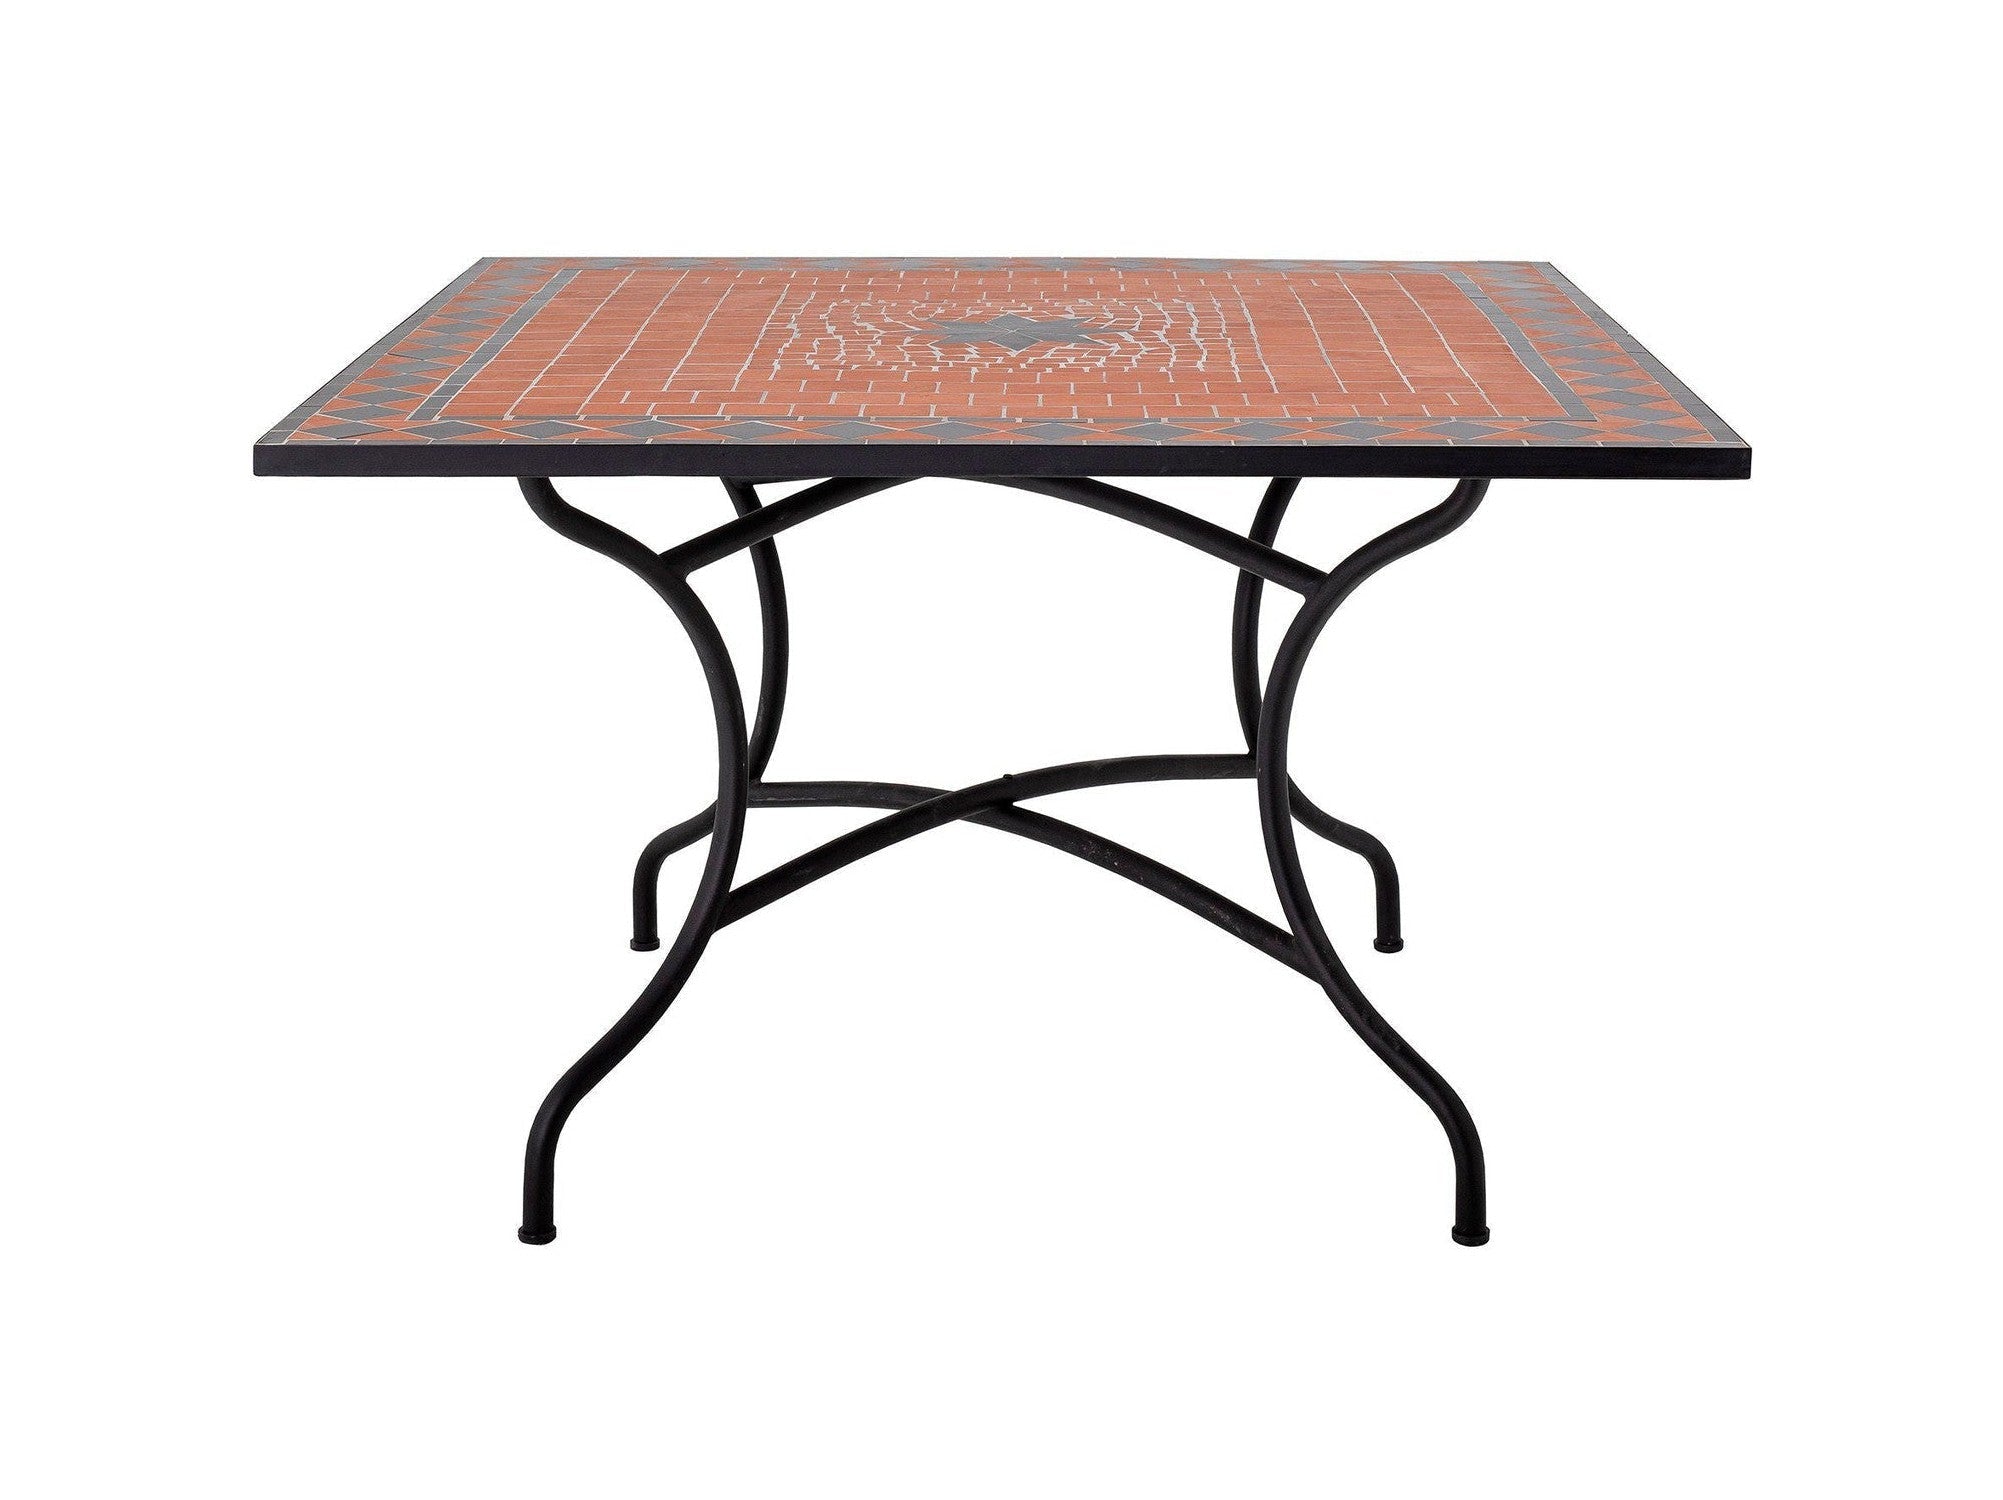 Creative Collection Hellen Dining Table, Red, Stone